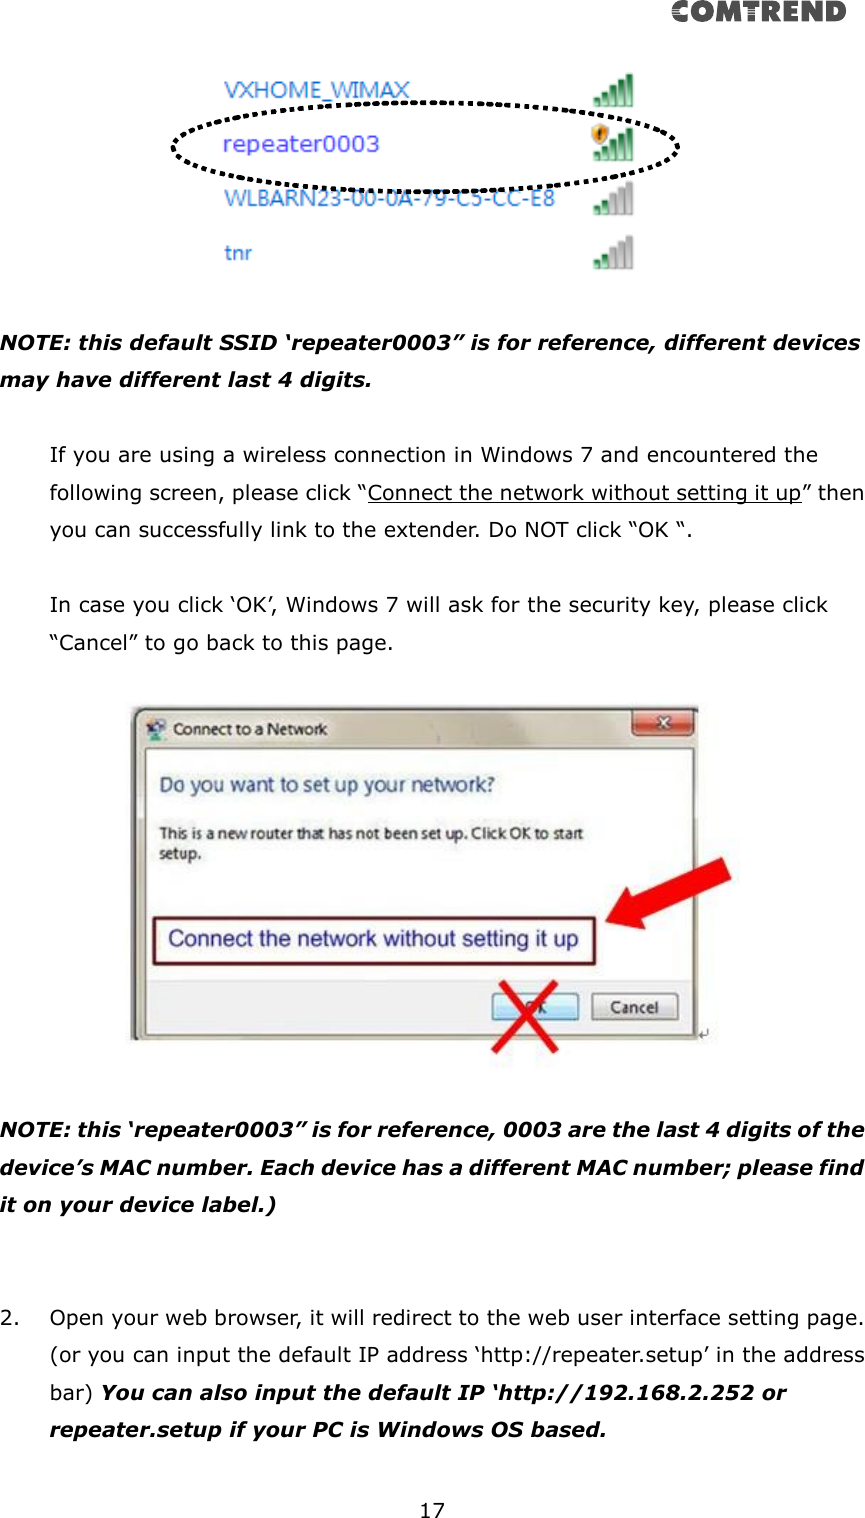       17    NOTE: this default SSID ‘repeater0003” is for reference, different devices may have different last 4 digits.  If you are using a wireless connection in Windows 7 and encountered the following screen, please click “Connect the network without setting it up” then you can successfully link to the extender. Do NOT click “OK “.    In case you click ‘OK’, Windows 7 will ask for the security key, please click “Cancel” to go back to this page.    NOTE: this ‘repeater0003” is for reference, 0003 are the last 4 digits of the device’s MAC number. Each device has a different MAC number; please find it on your device label.)     2. Open your web browser, it will redirect to the web user interface setting page. (or you can input the default IP address ‘http://repeater.setup’ in the address bar) You can also input the default IP ‘http://192.168.2.252 or repeater.setup if your PC is Windows OS based.  